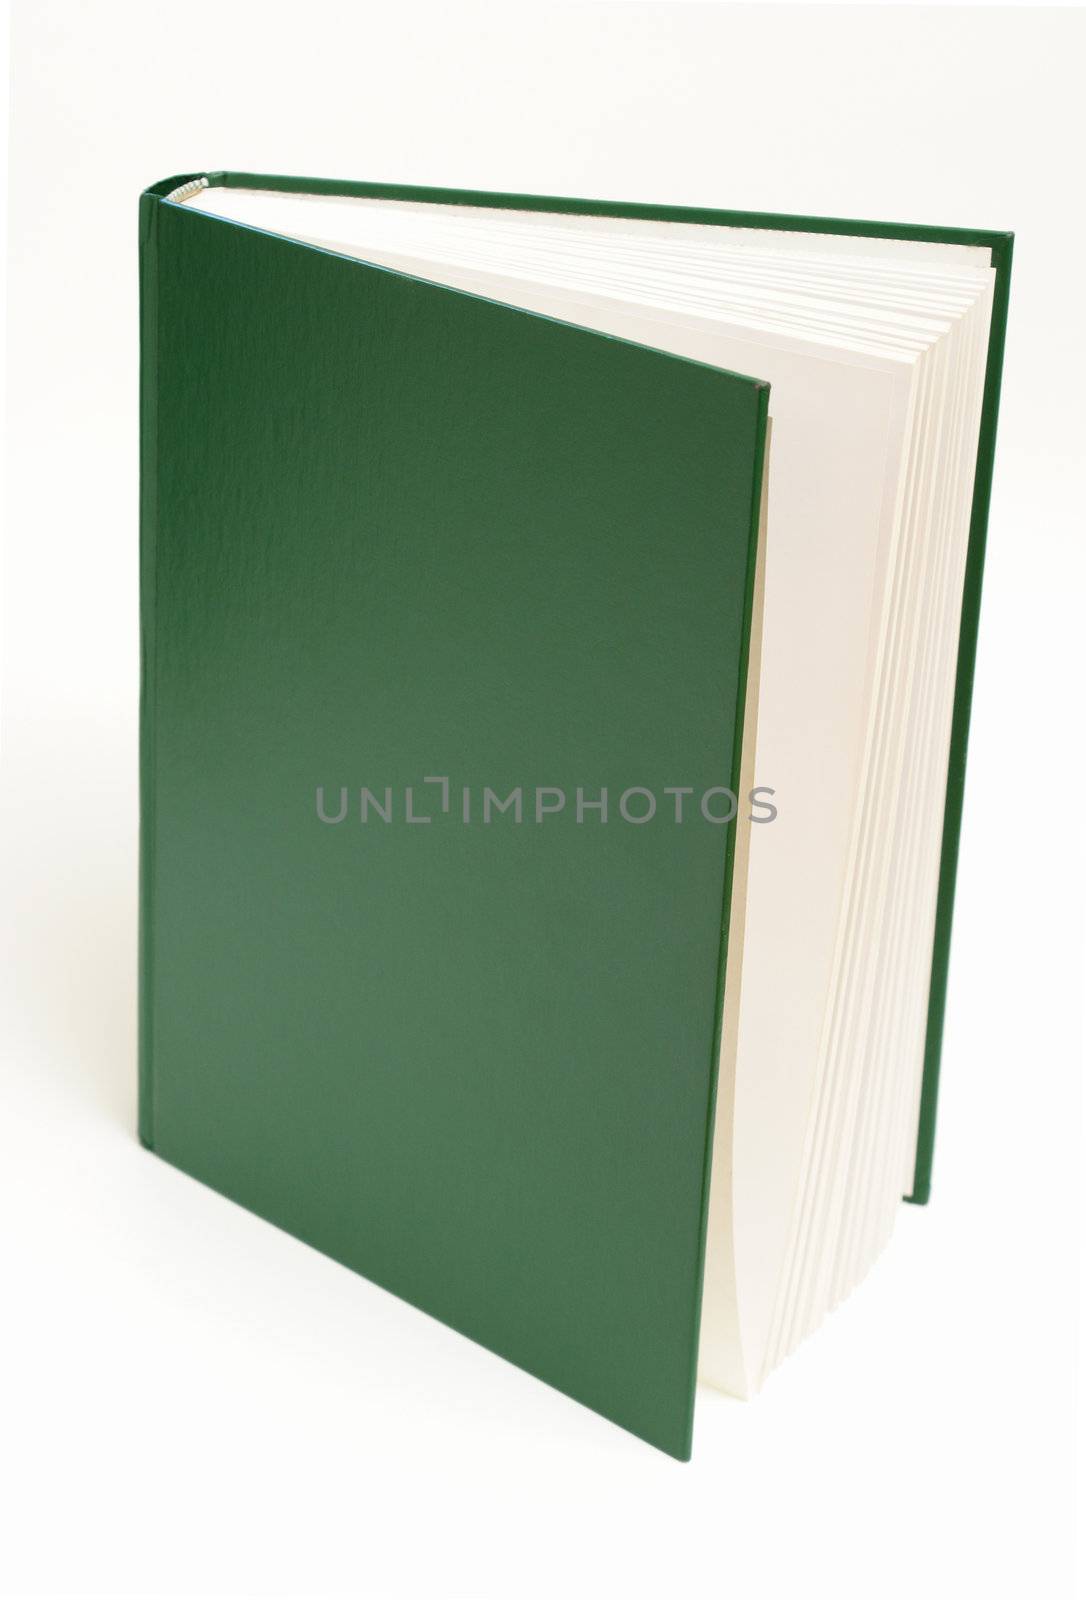 A green book is standing upright over a white background.